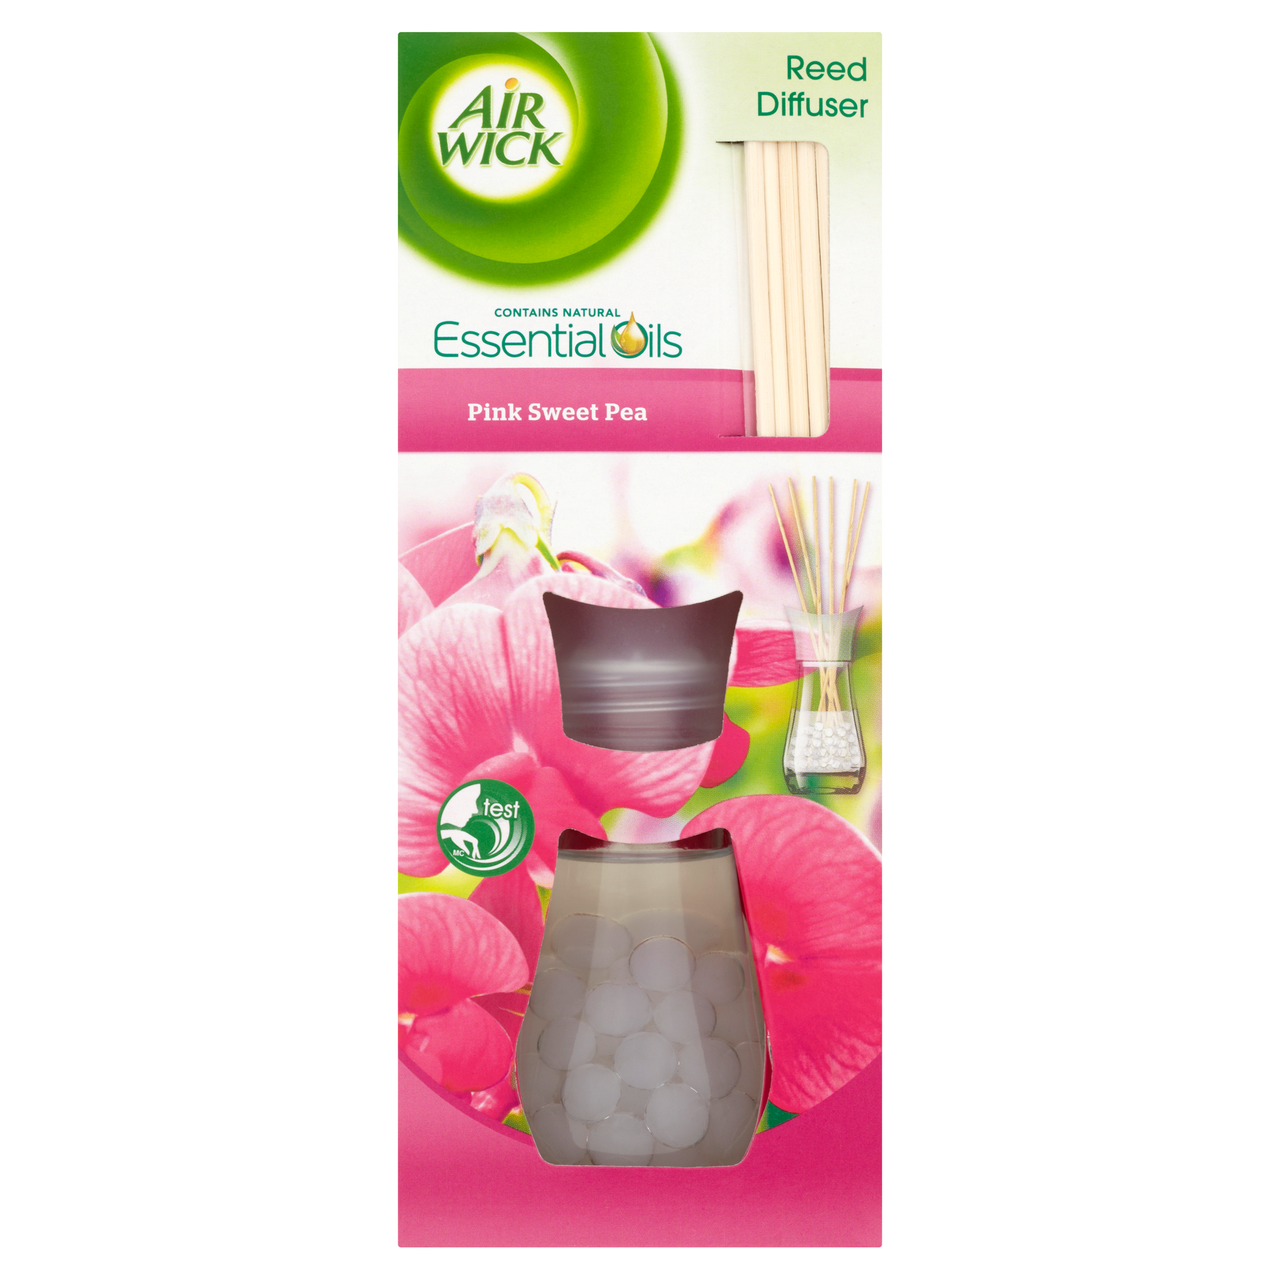 Air Wick Reed Diffuser Pink Sweet Pea